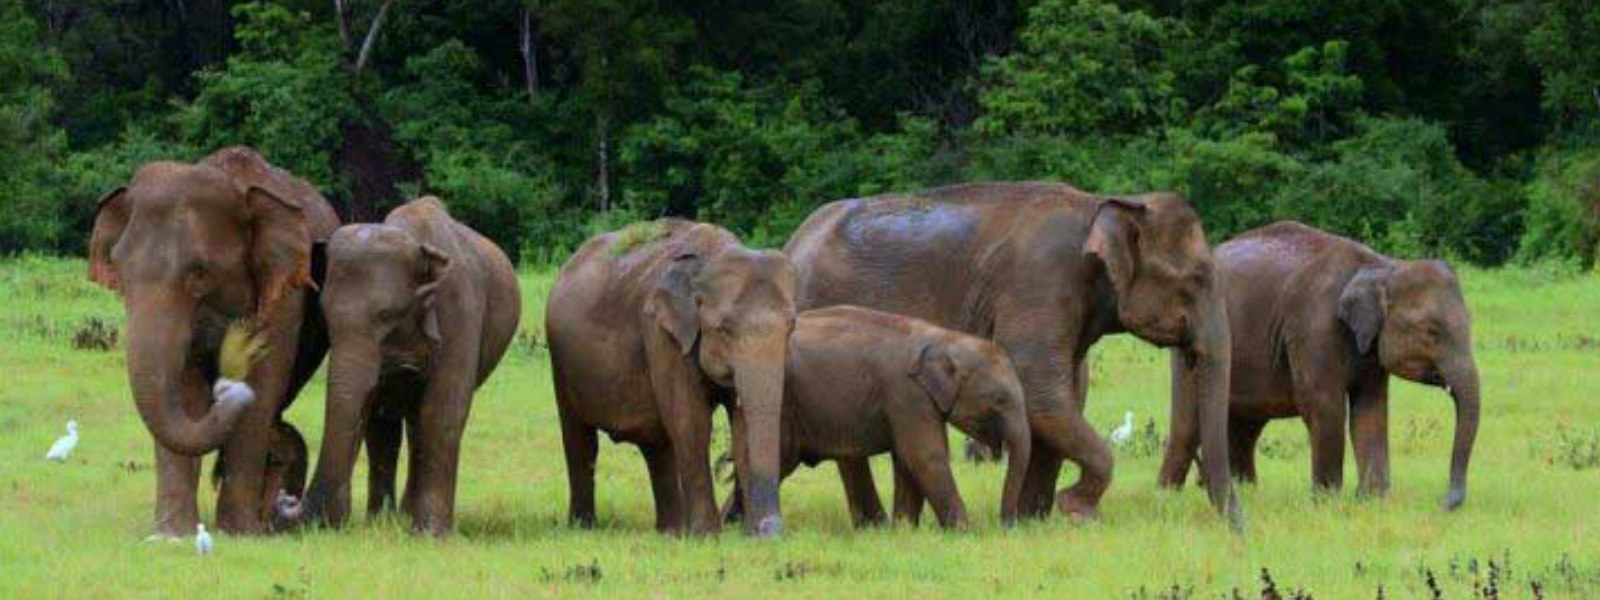 Two children, 9 & 11, killed in elephant attack